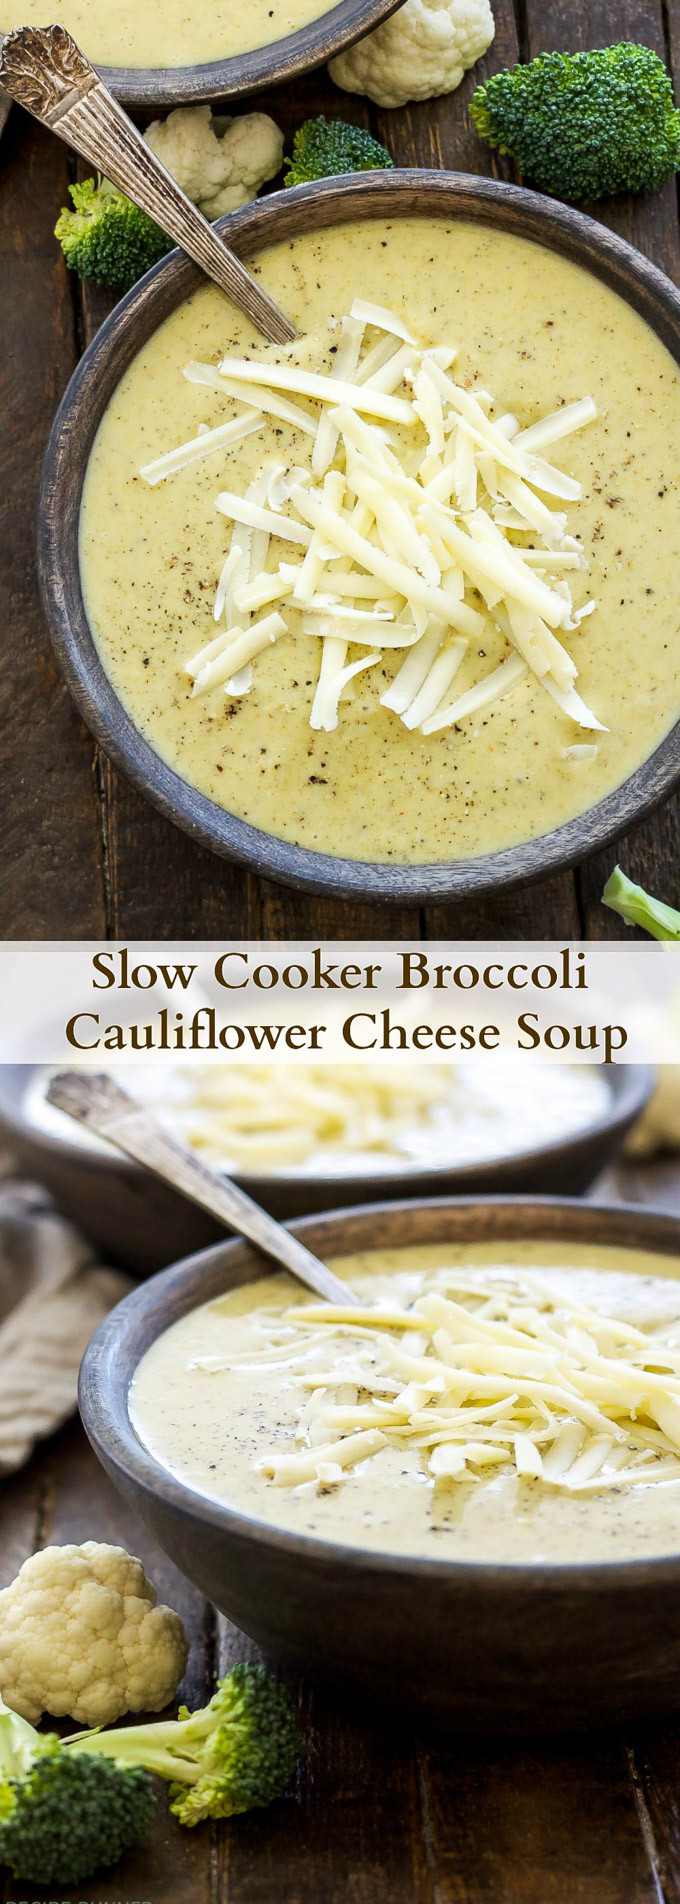 Slow Cooker Broccoli Cheddar Soup
 Slow Cooker Broccoli Cauliflower Cheese Soup Recipe Runner